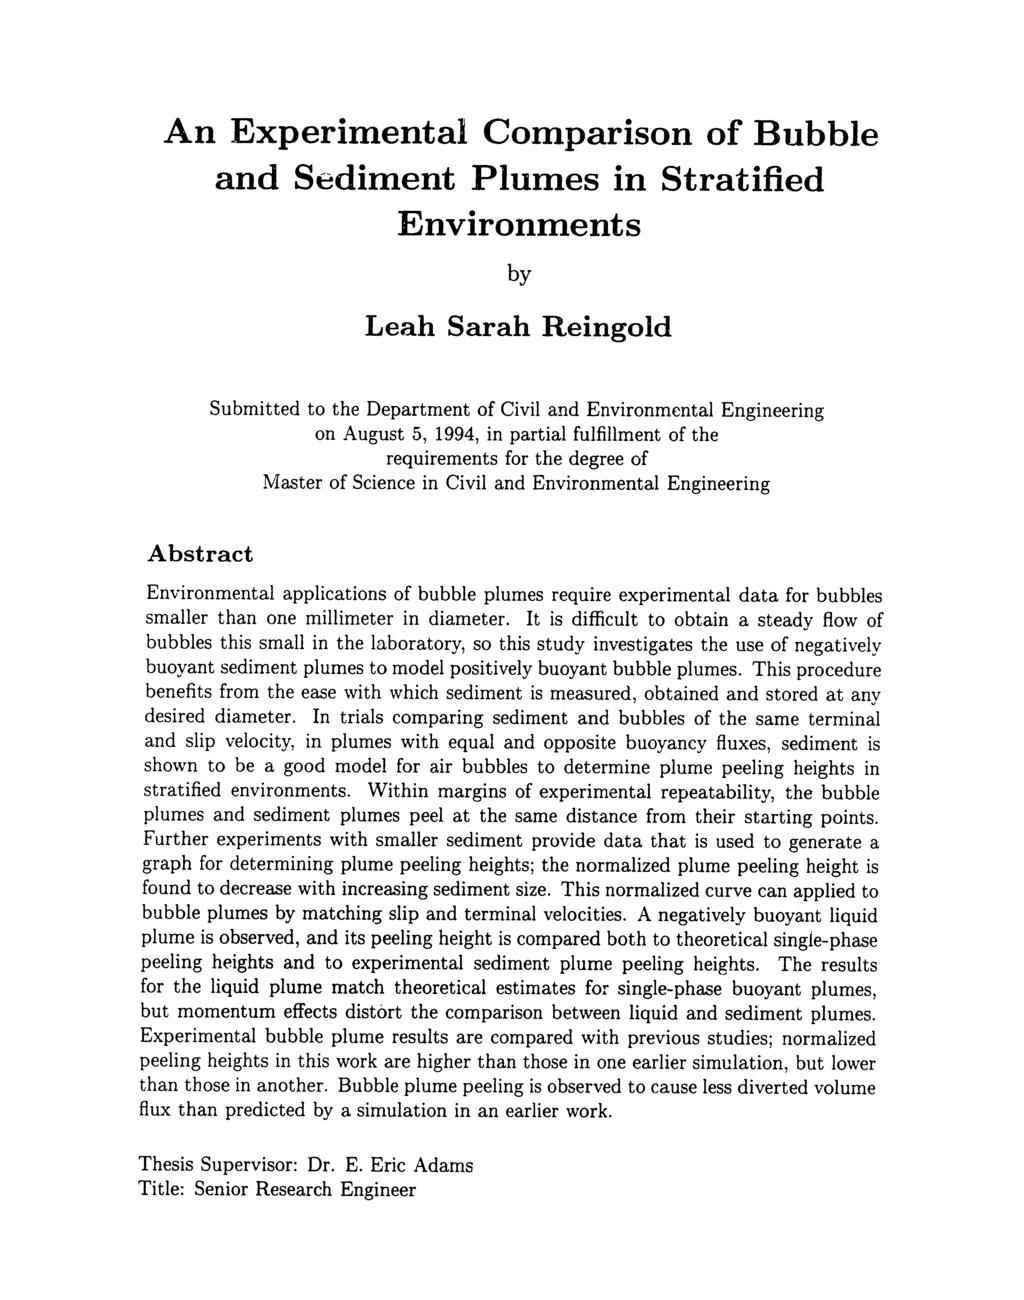 An Experimental Comparison of Bubble and Sediment Plumes in Stratified Environments by Leah Sarah Reingold Submitted to the Department of Civil and Environmental Engineering on August 5, 1994, in